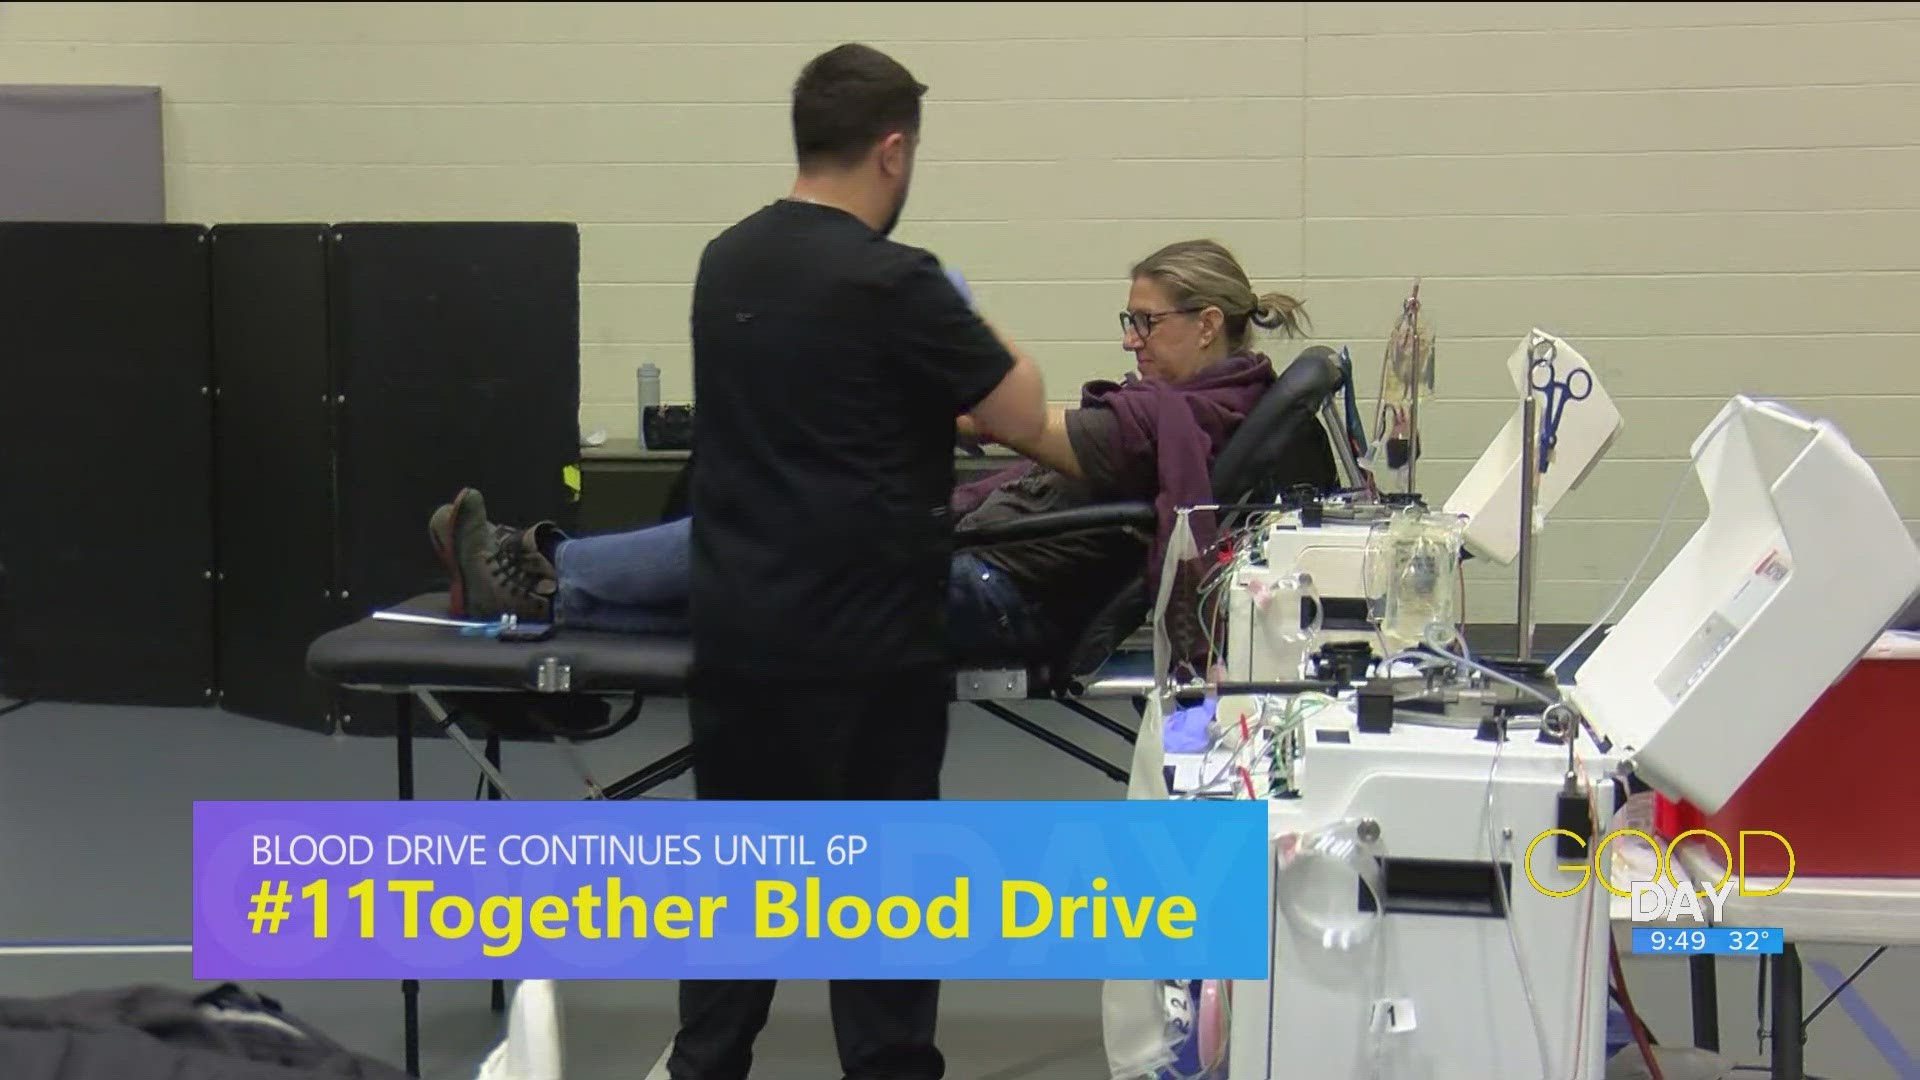 Today is the annual 11#Together Blood Drive. Your donation could help save as many as three lives.